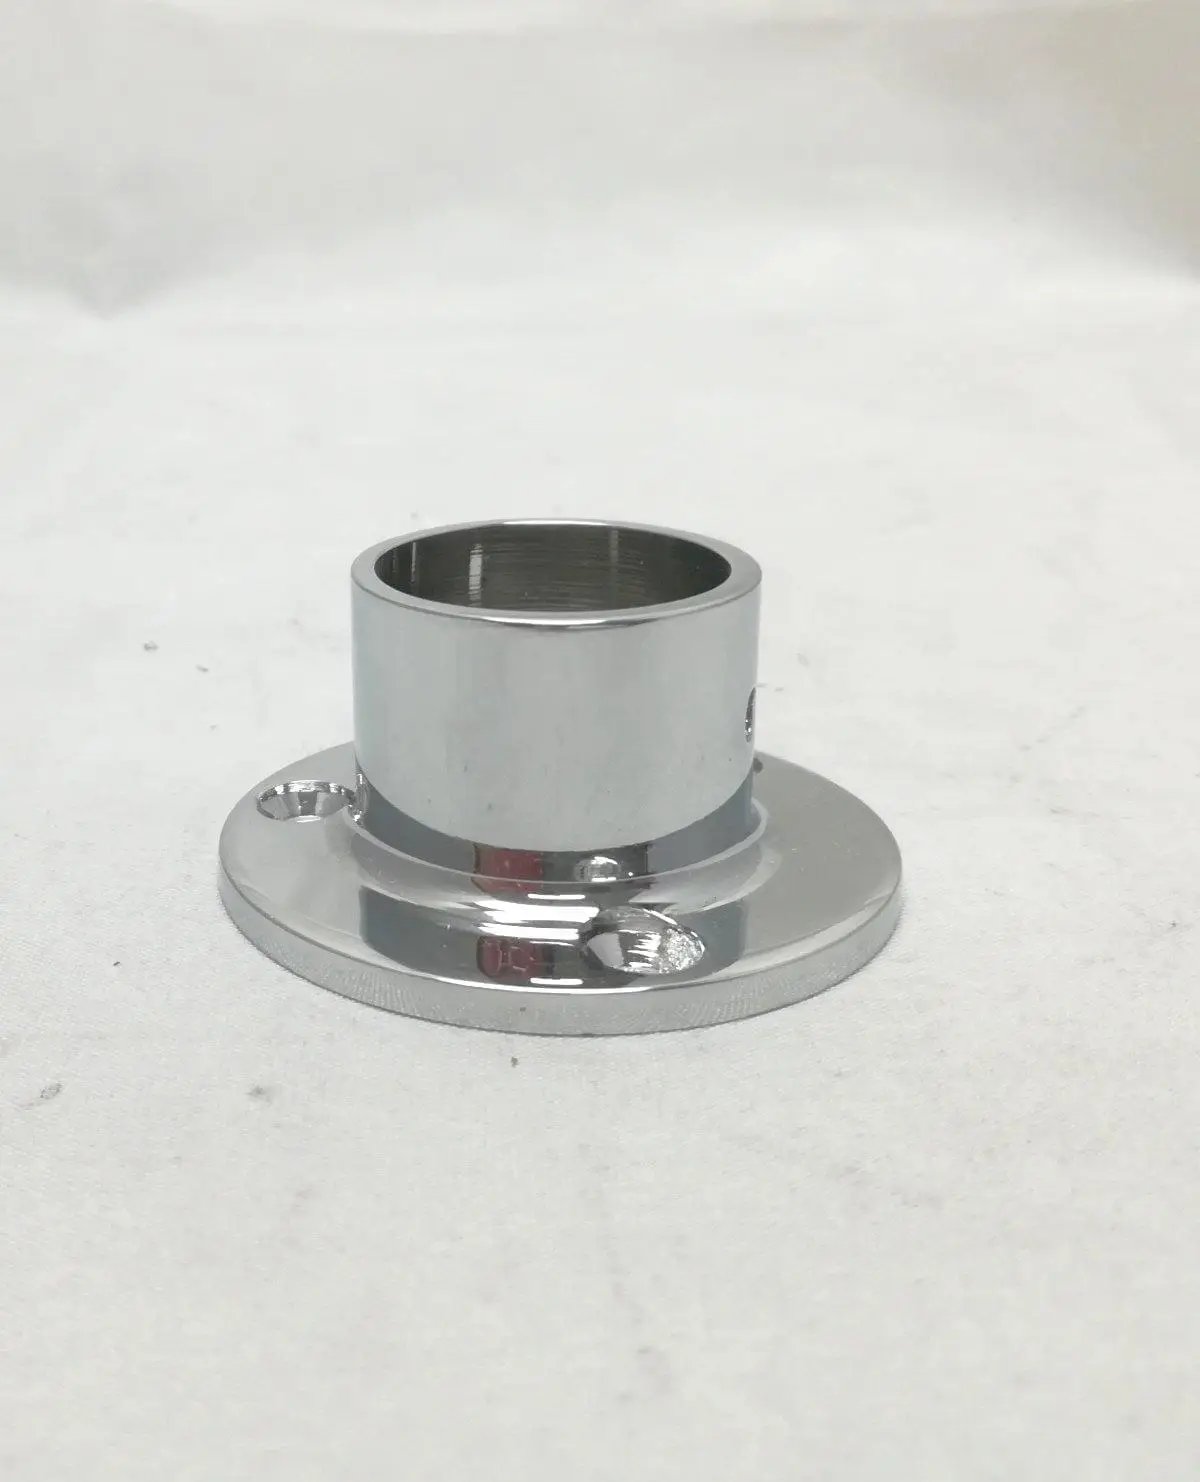 1" Tall Flange for 1" OD Tubing FLANGES AND ANCHORS, COMPONENTS FOR 1" OD TUBING, DRAPERY HARDWARE CHROMEPLATED-SpecialFinish-SPECIALFINISH Trade Diversified